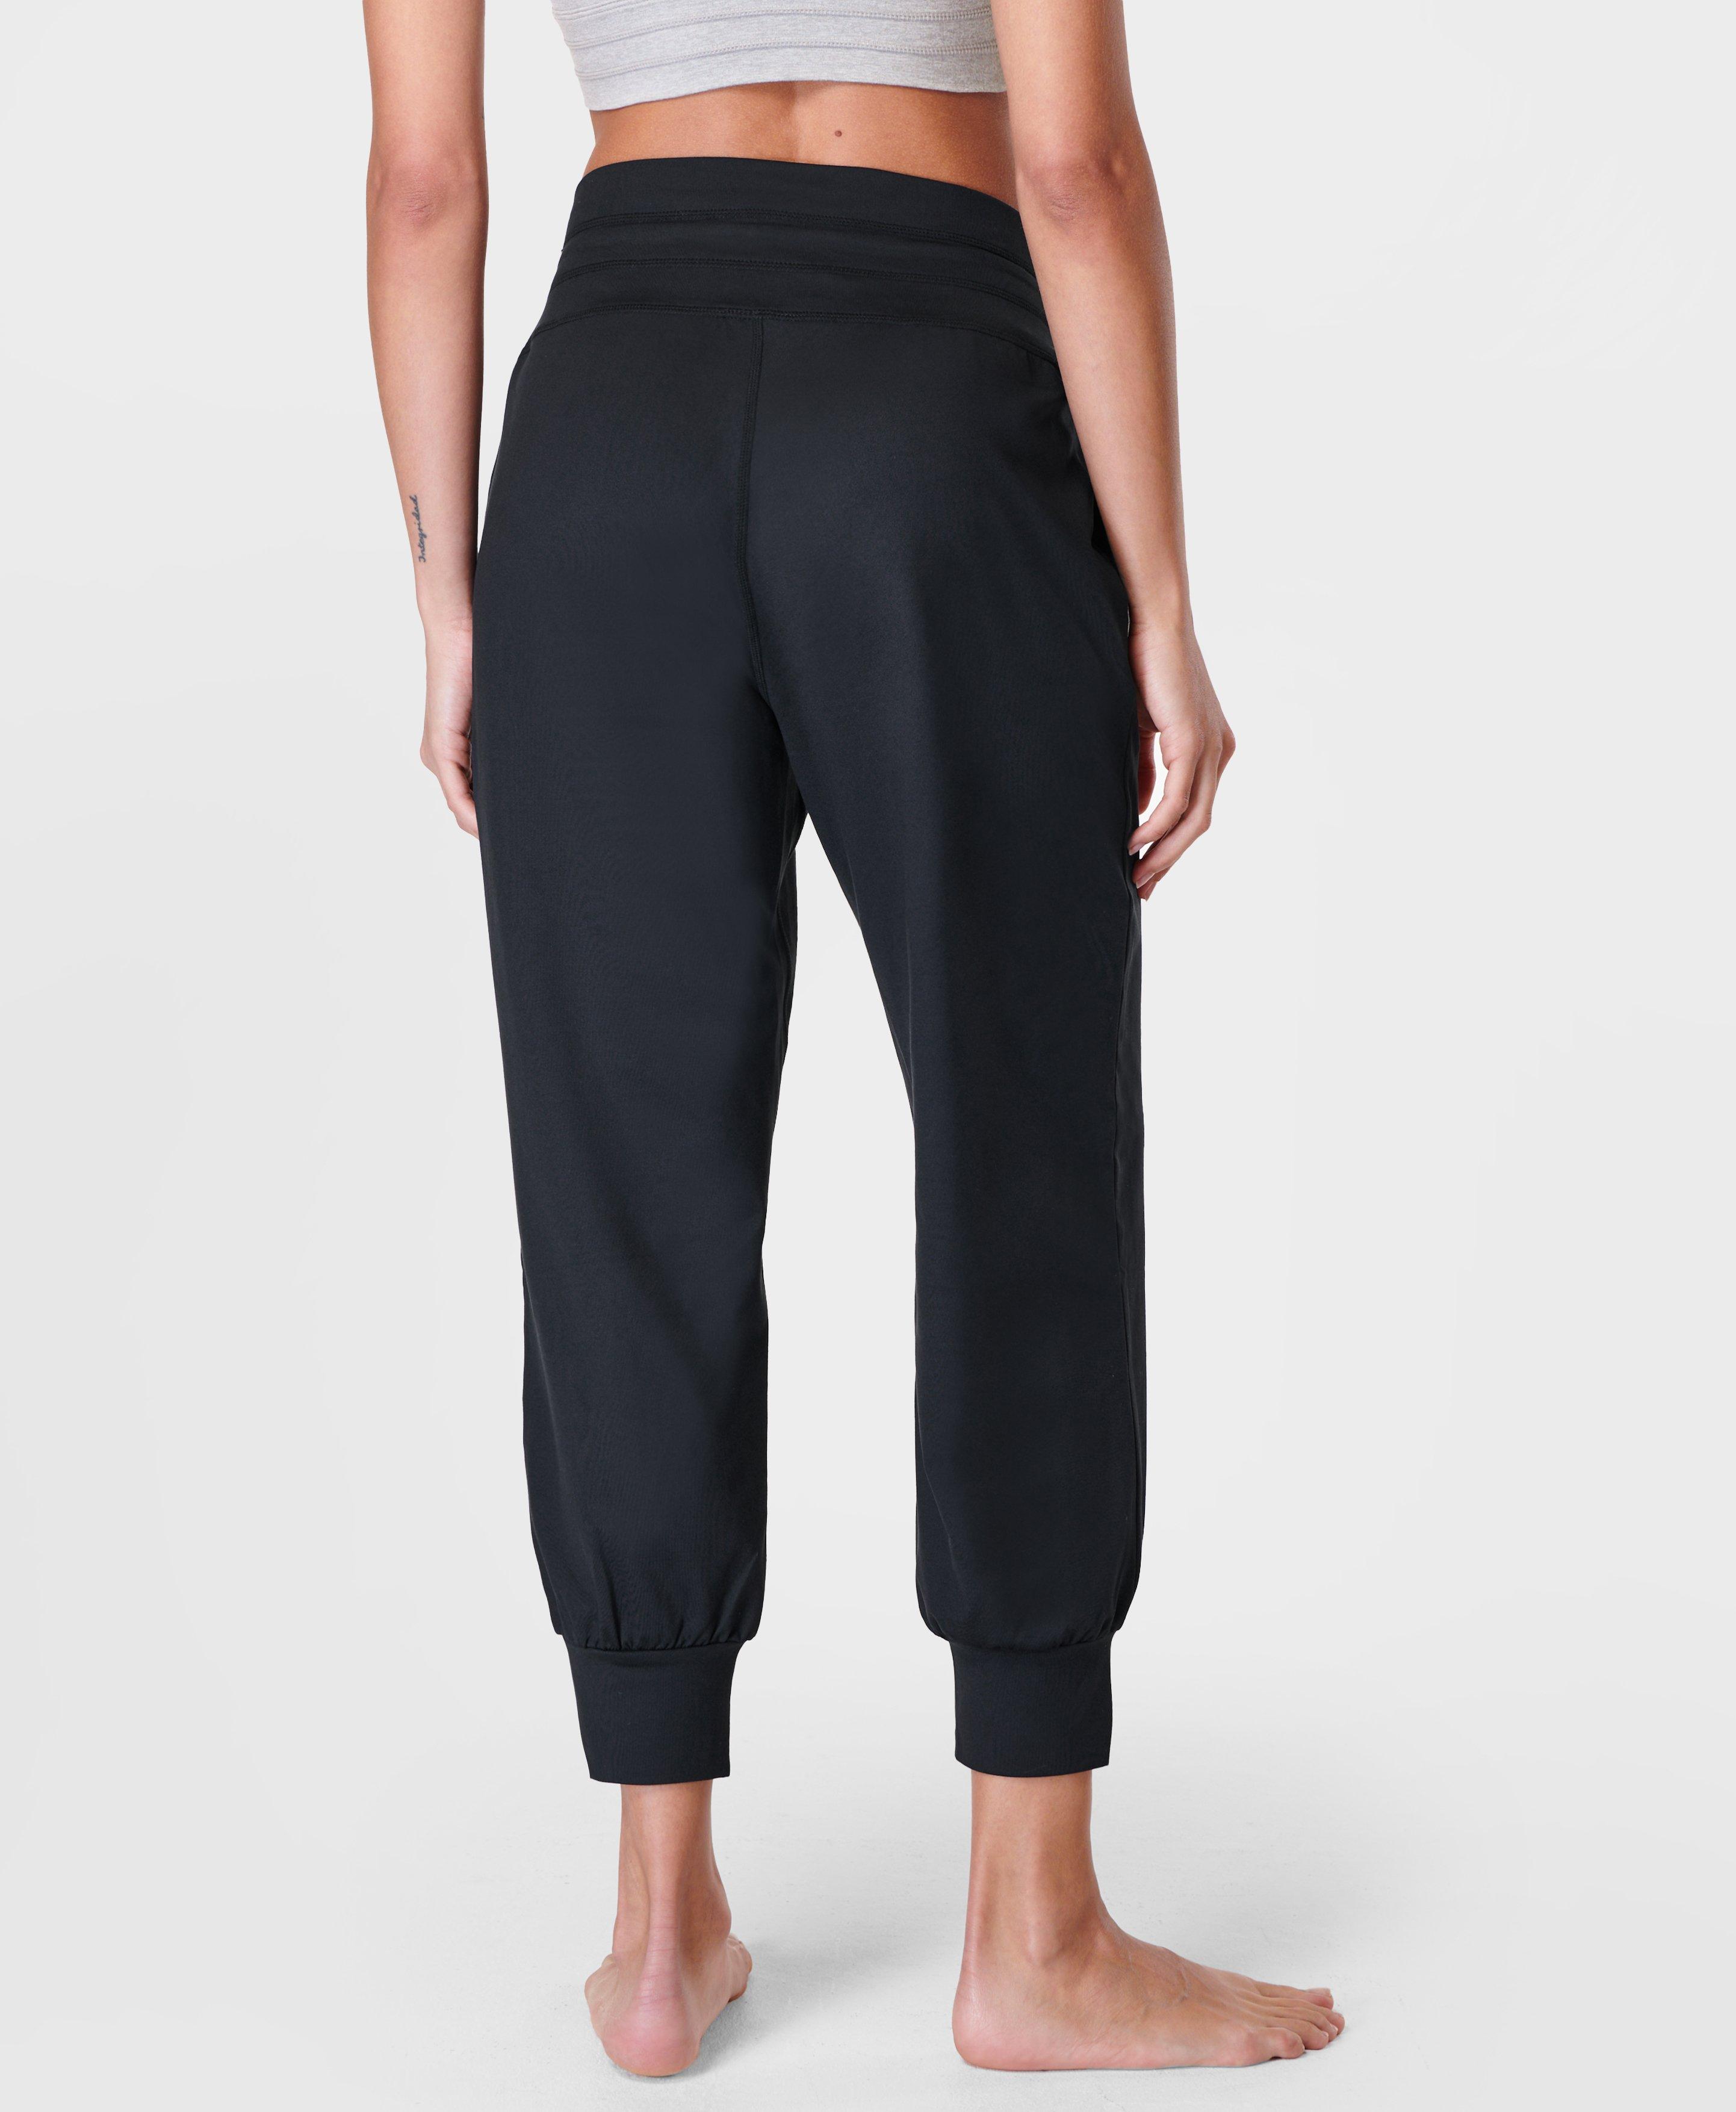 dupe alert! These Sweaty Betty joggers look like a decent